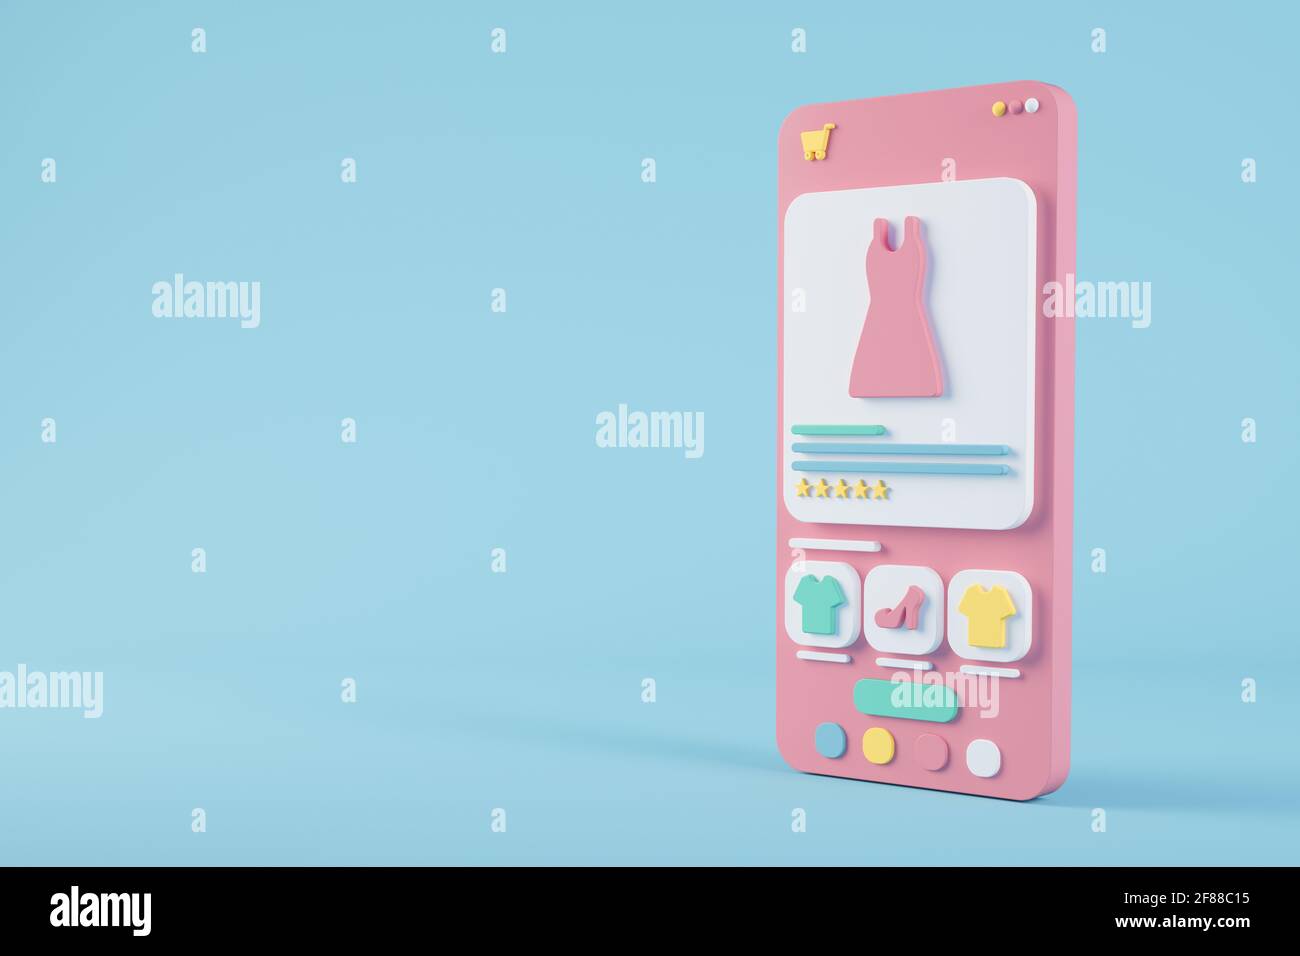 Cartoon phone with shopping app 3d rendering Stock Photo